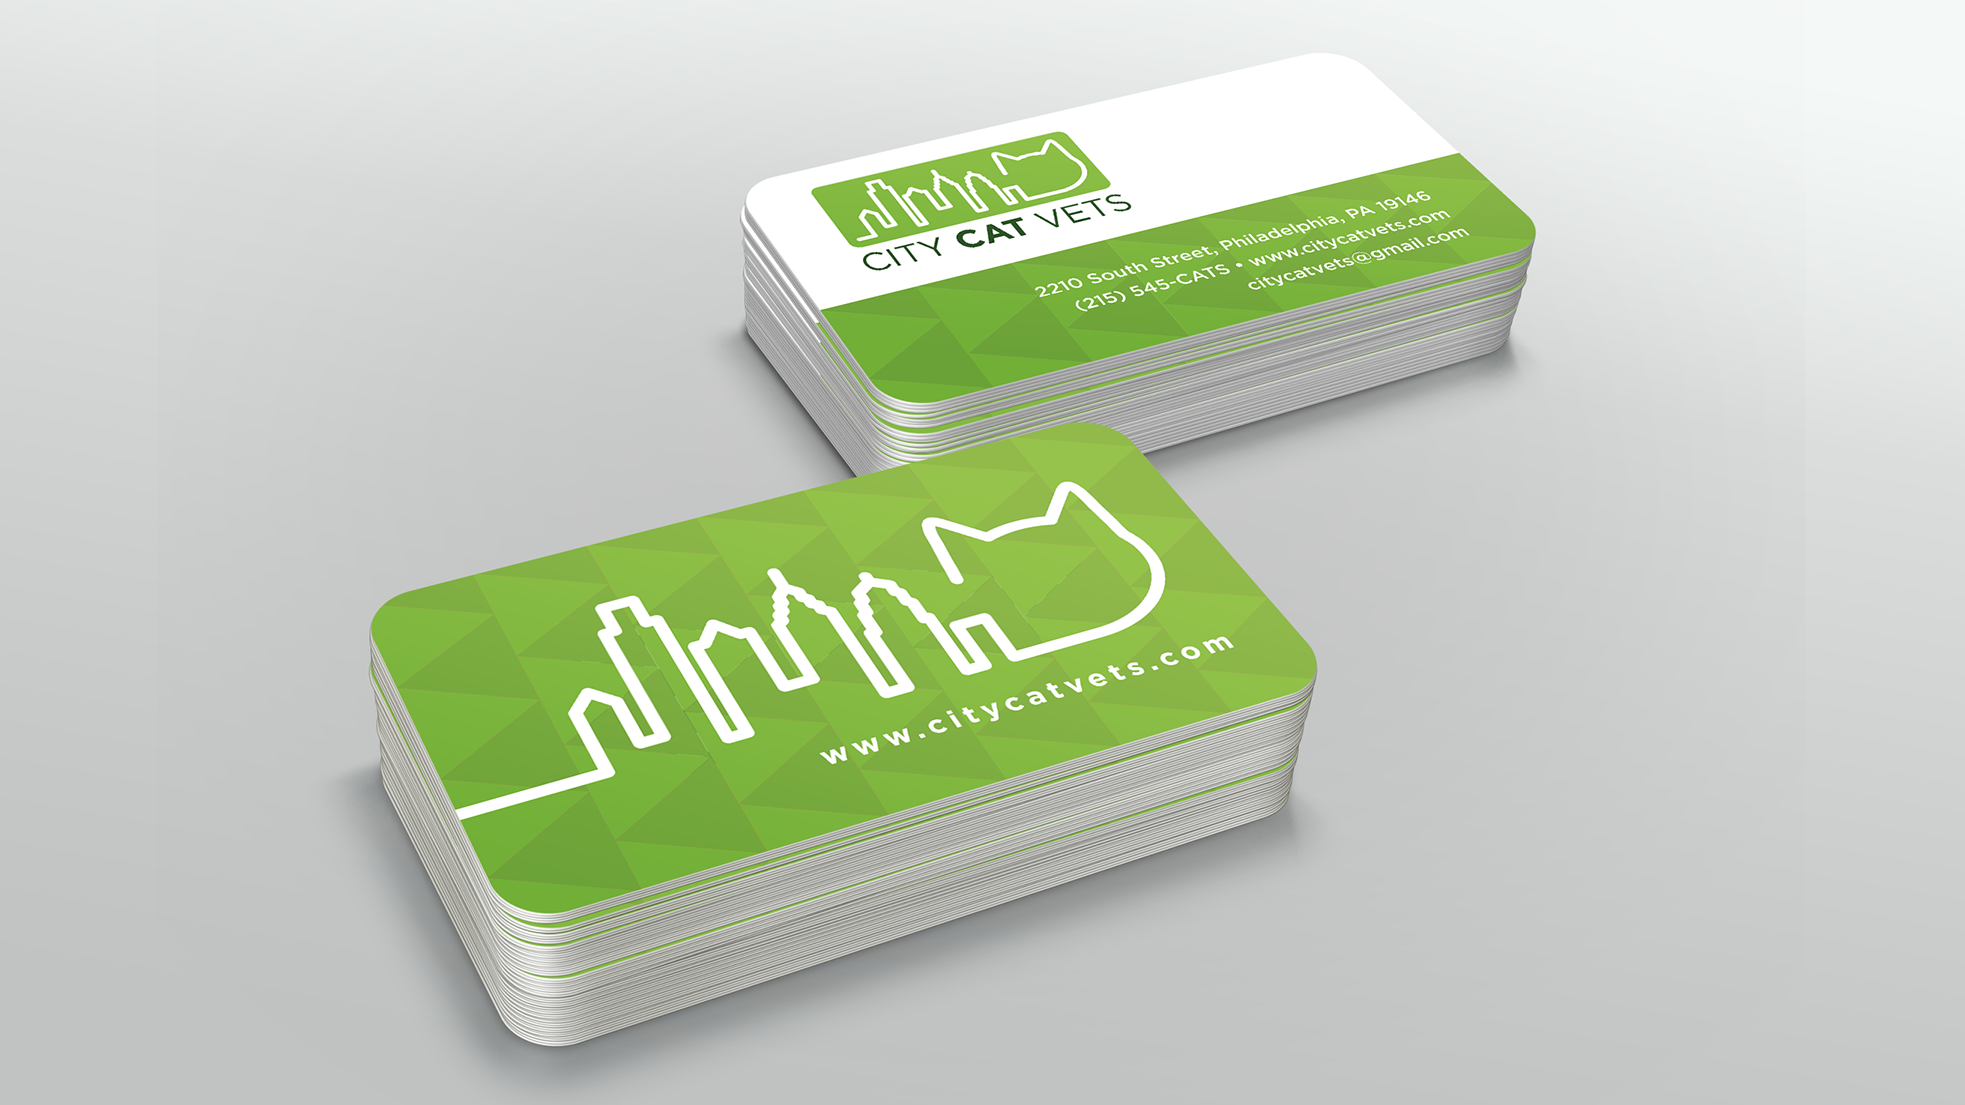 City Cat Vets business cards